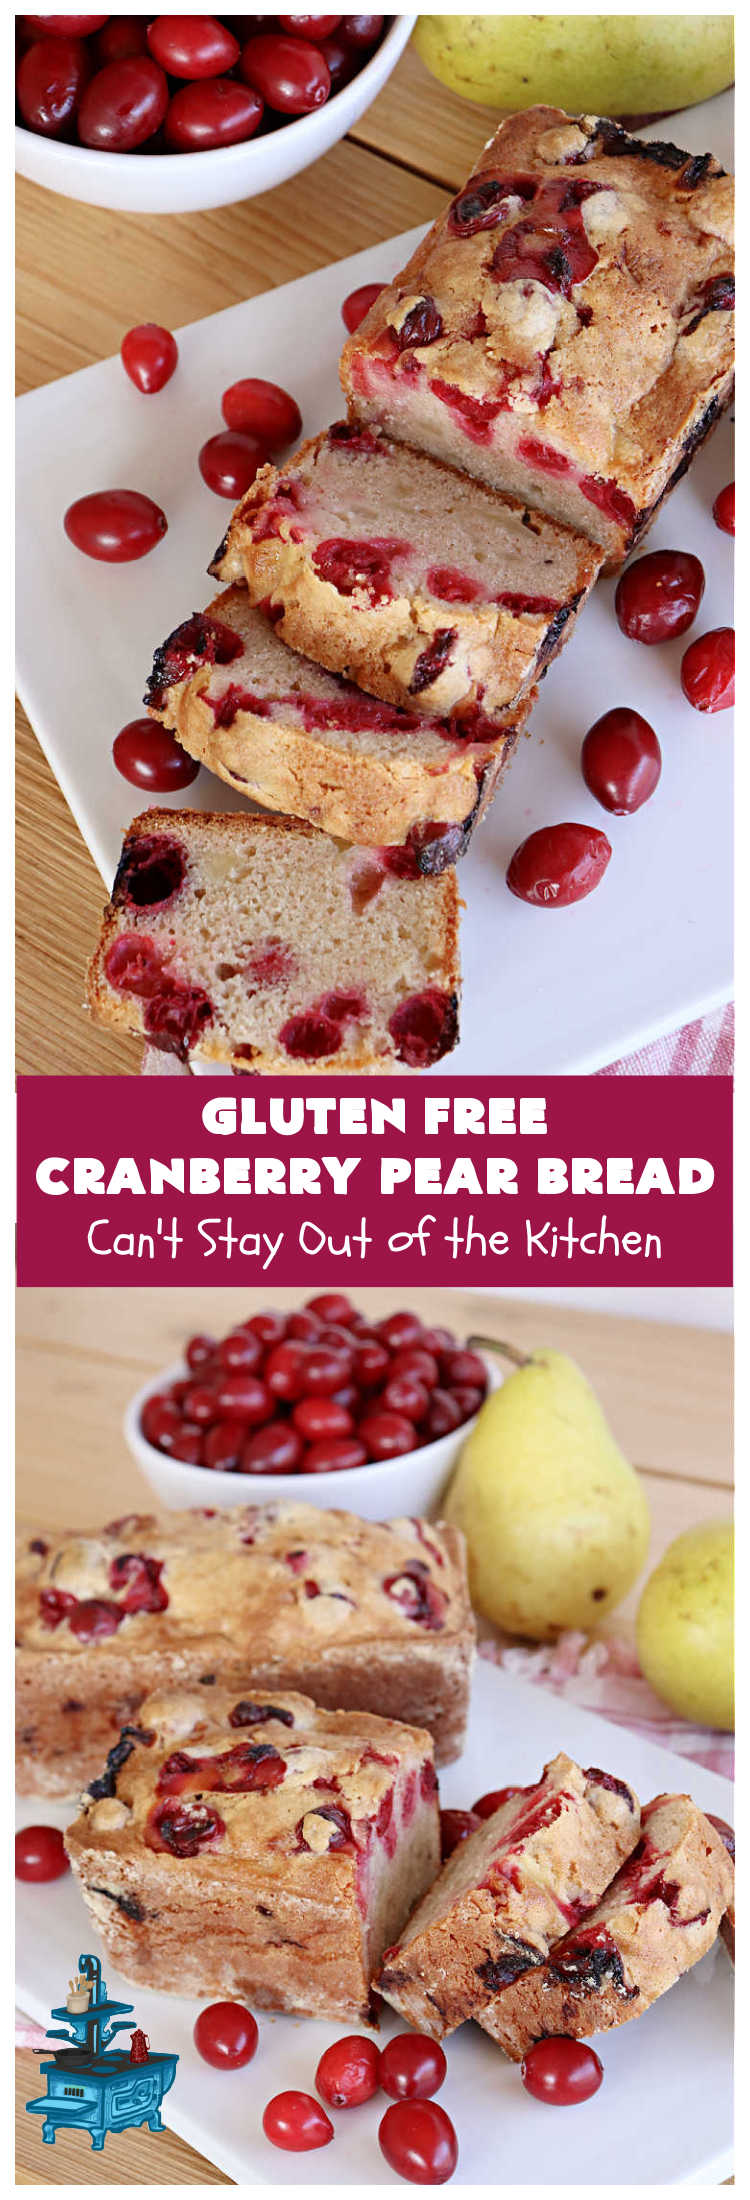 Gluten Free Cranberry Pear Bread | Can't Stay Out of the Kitchen | this luscious #SweetBread is made with fresh #cranberries & #pears. You can make it with #GlutenFree flour or regular flour--both taste fantastic. Great #bread for #holiday, or #FallBaking #Thanksgiving or #Christmas dinner. Great for #breakfast, #brunch or dinner. #GlutenFreeCranberryPearBread 